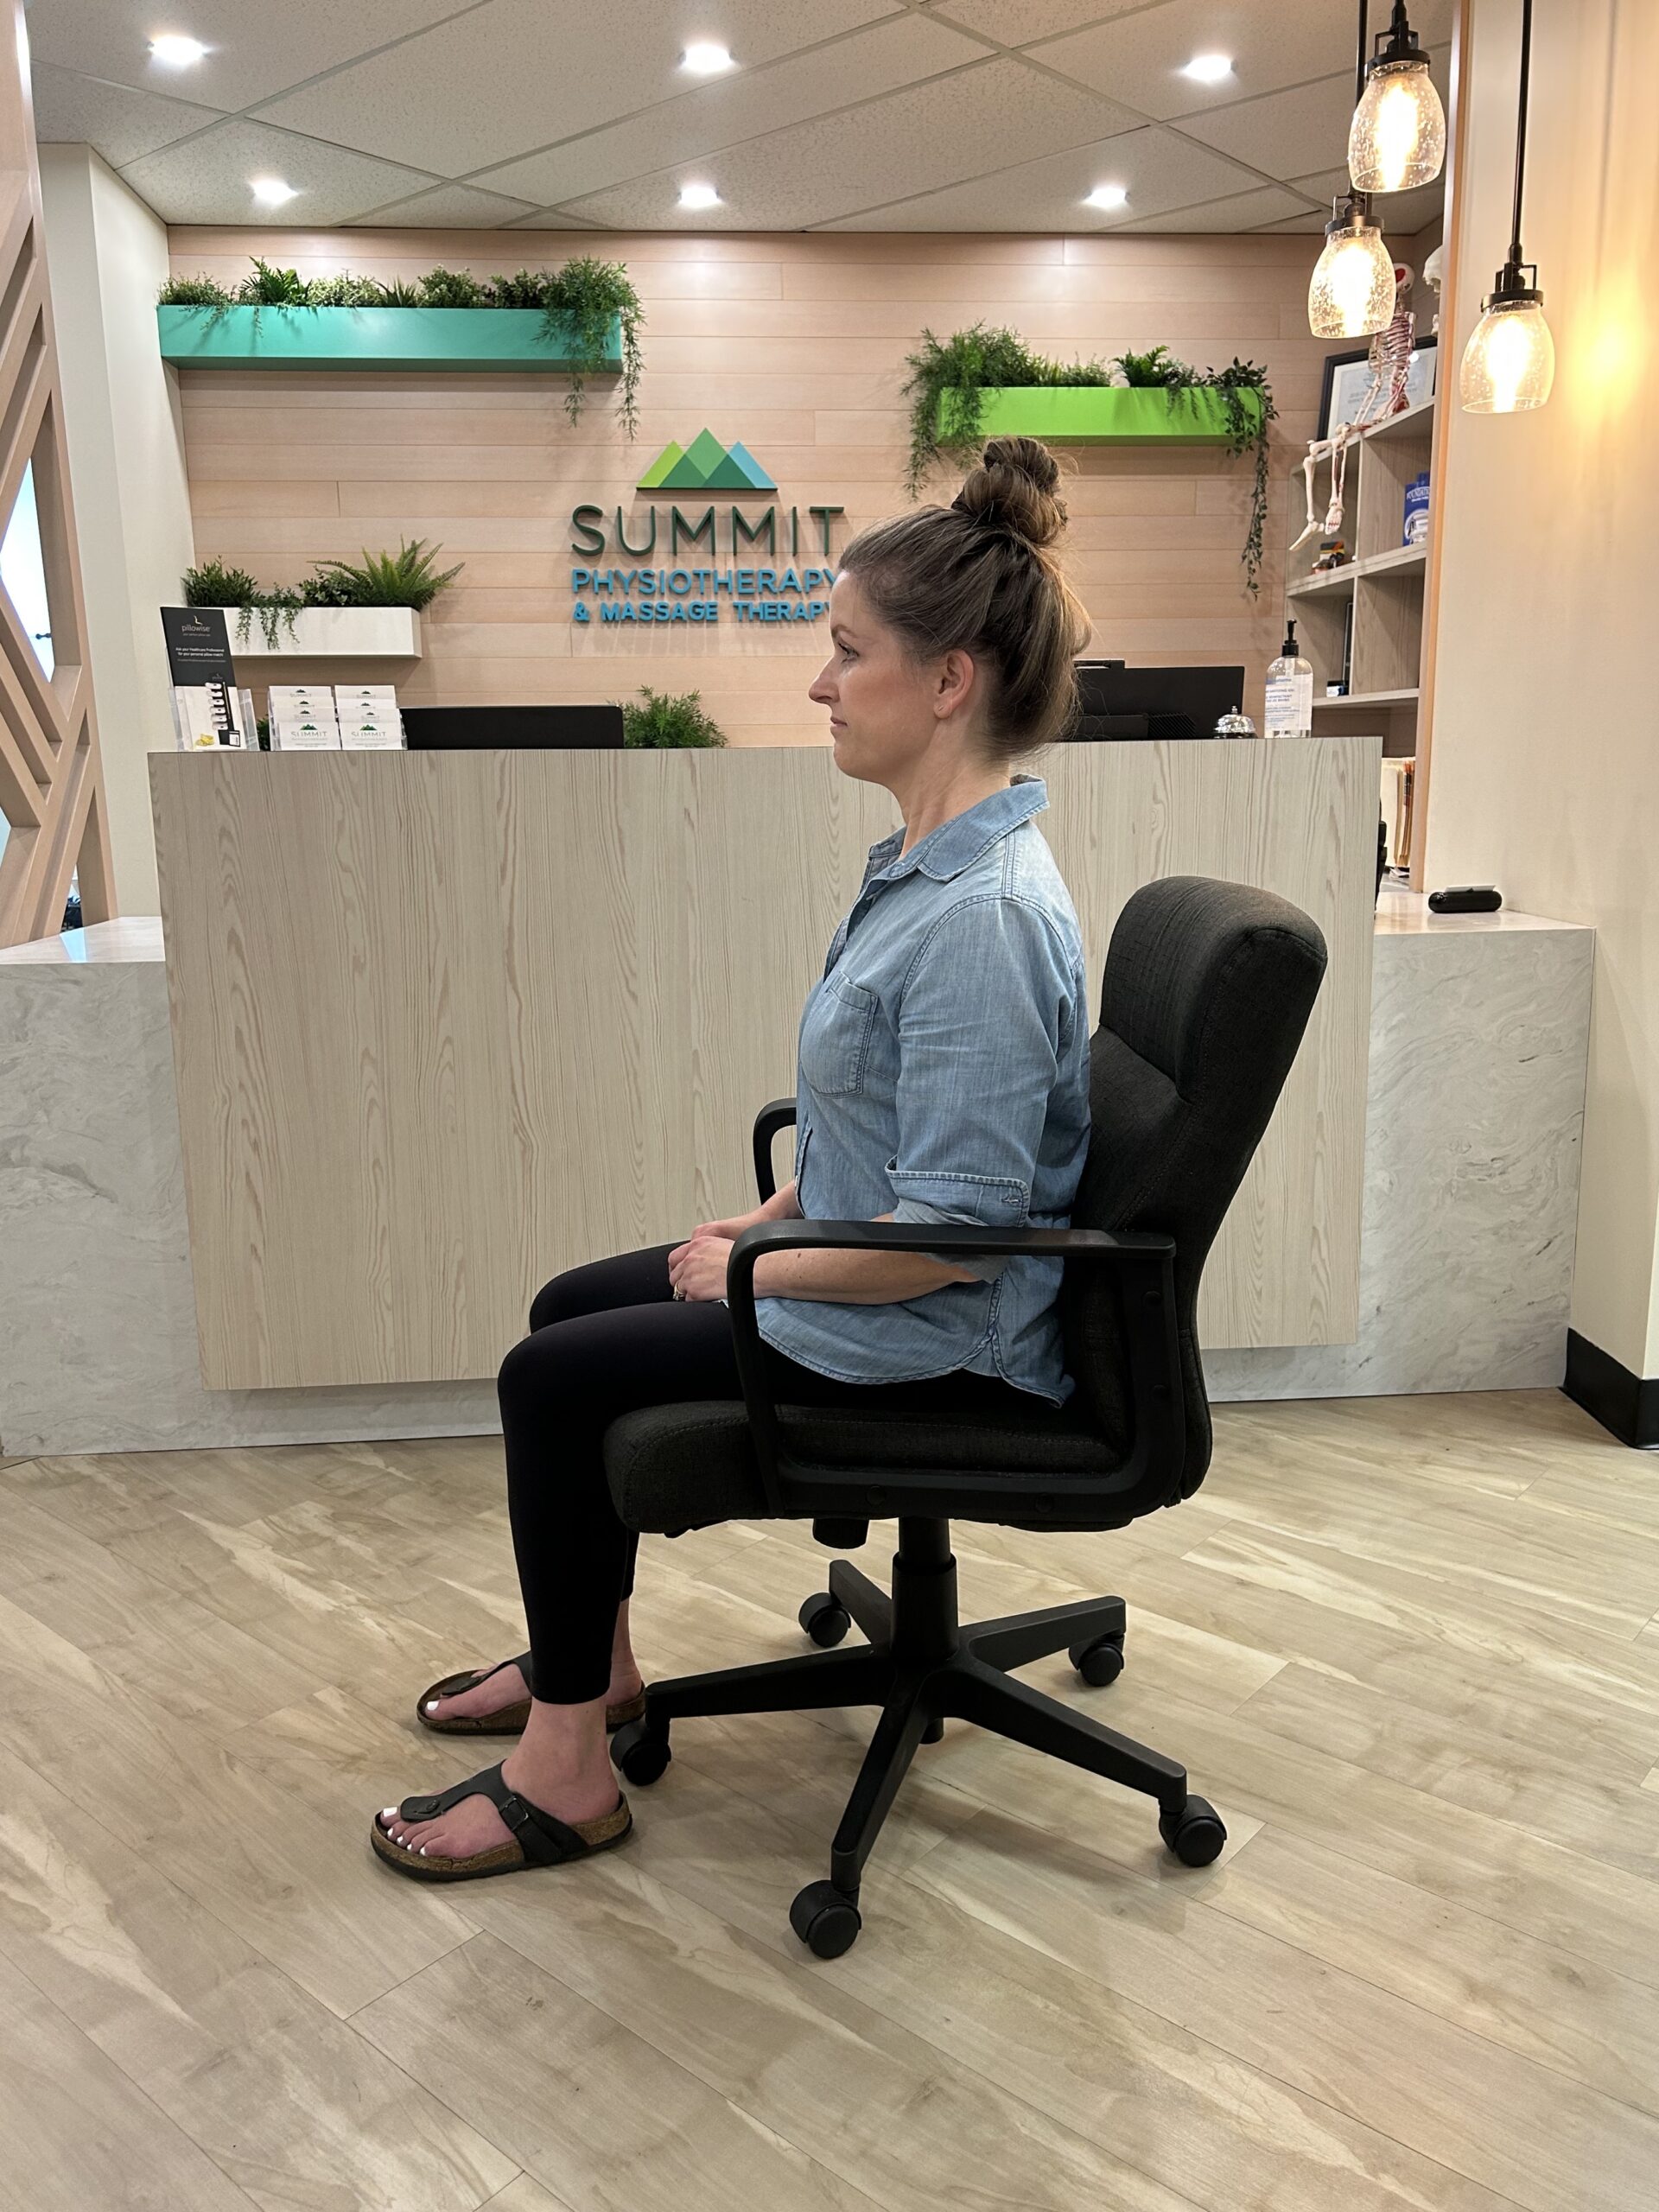 A lady sitting in a office chair demonstrating proper sitting posture.